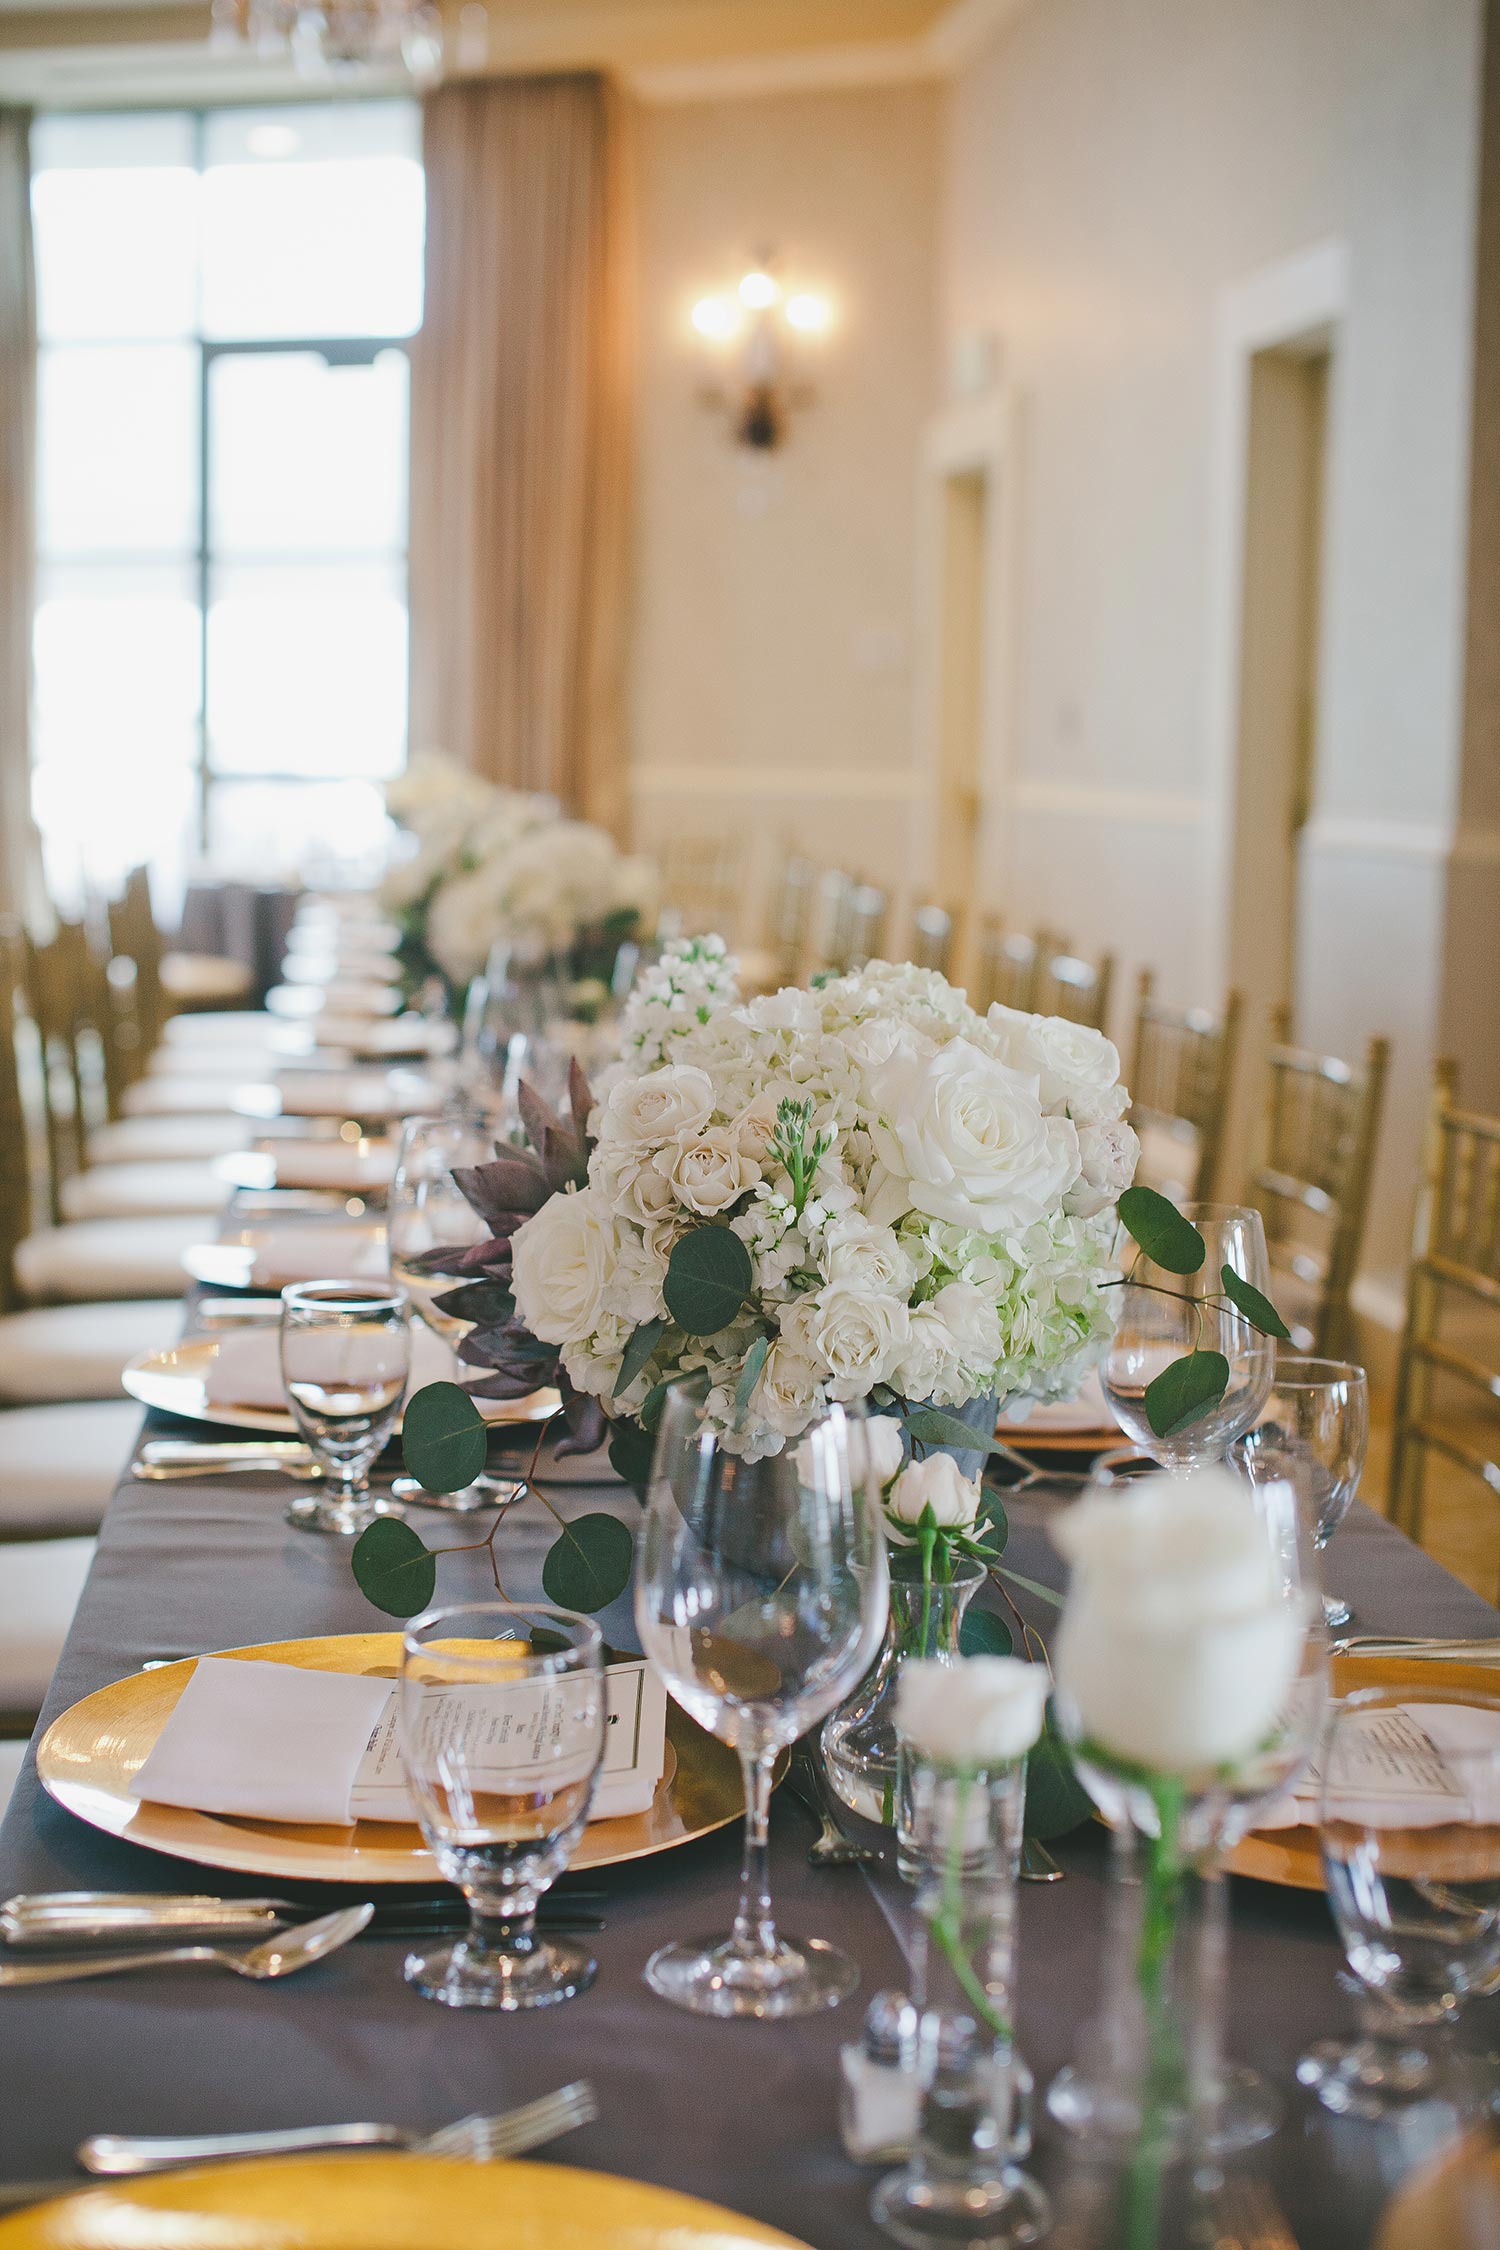 Grey linen table with white flower centerpieces and gold chargers